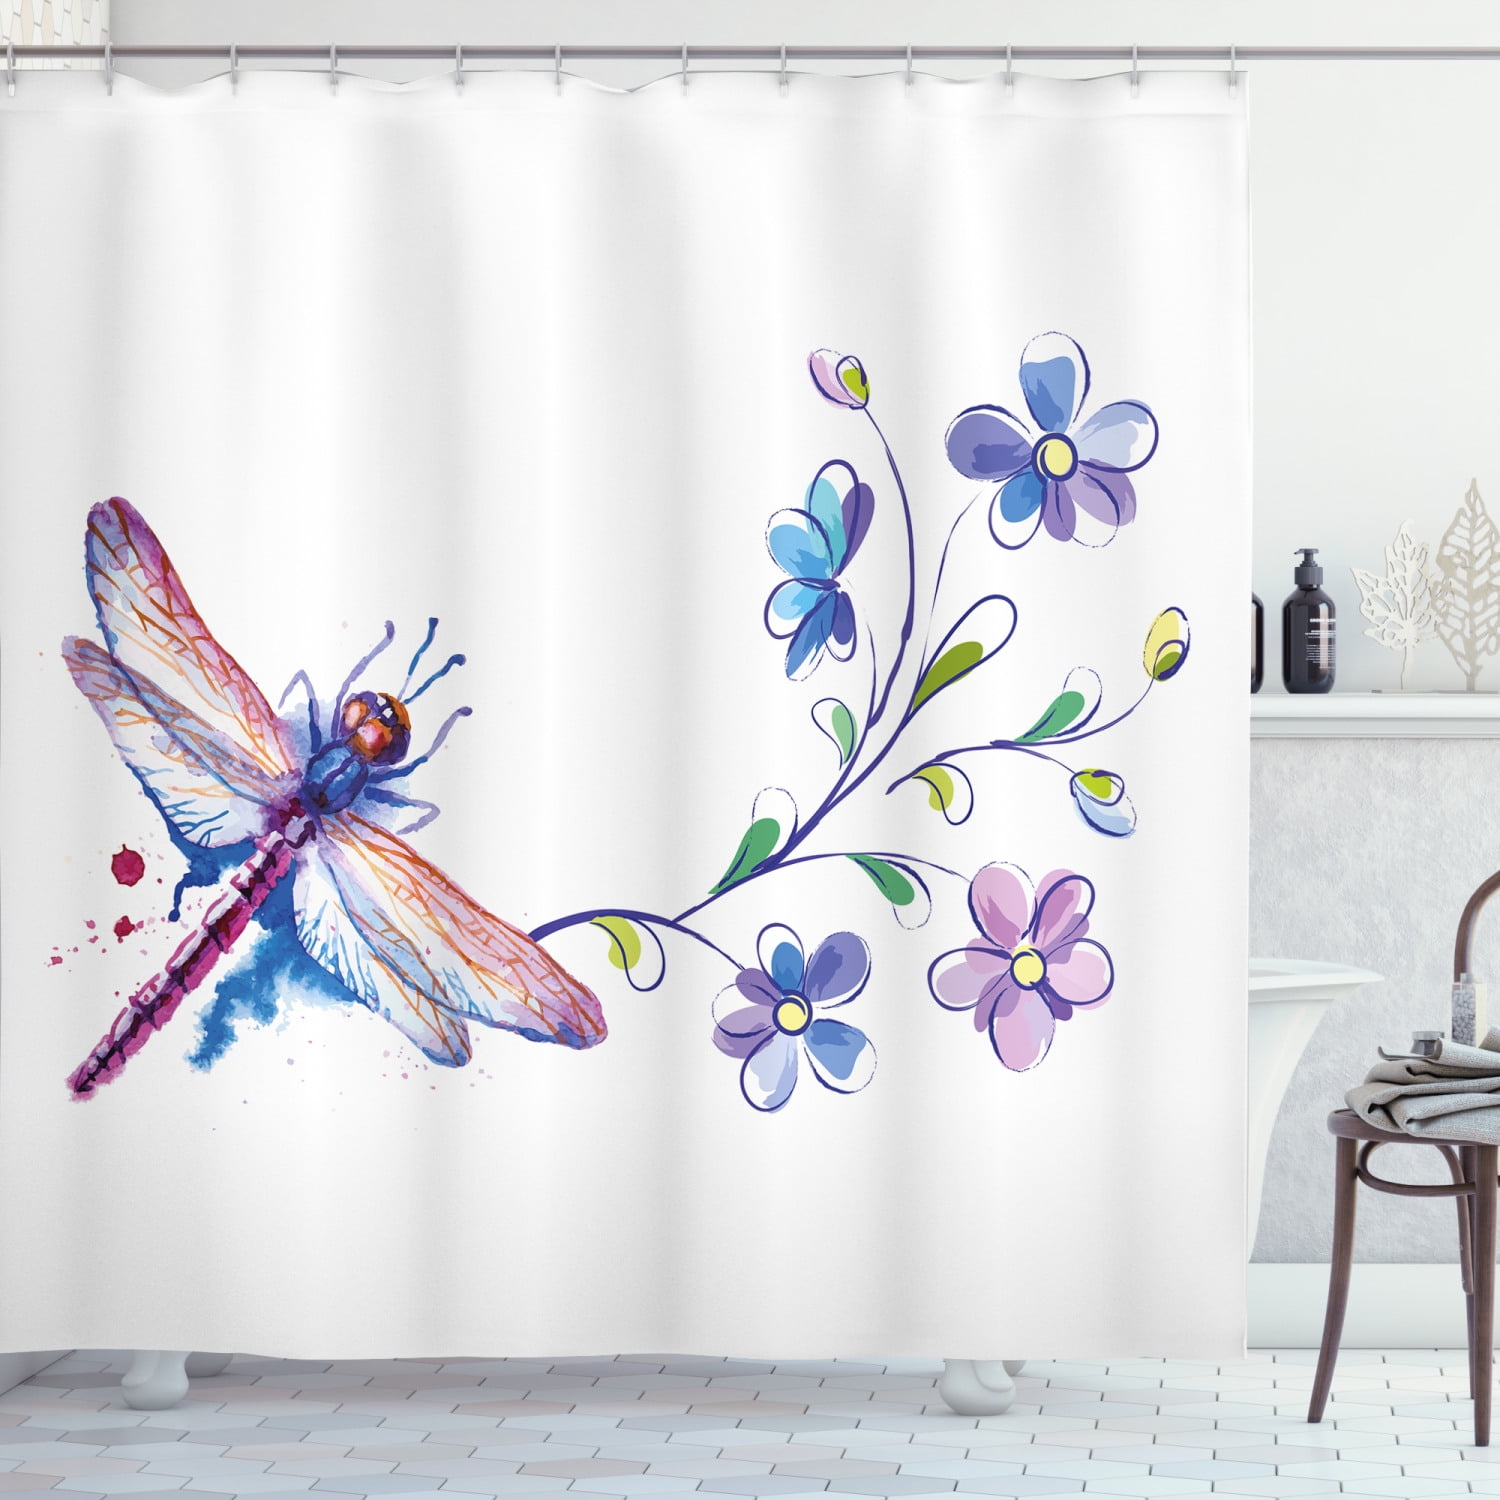 Insect Dragonfly Shower Curtain Waterproof Fabric Curtains Bath Mat Rug Carpet 